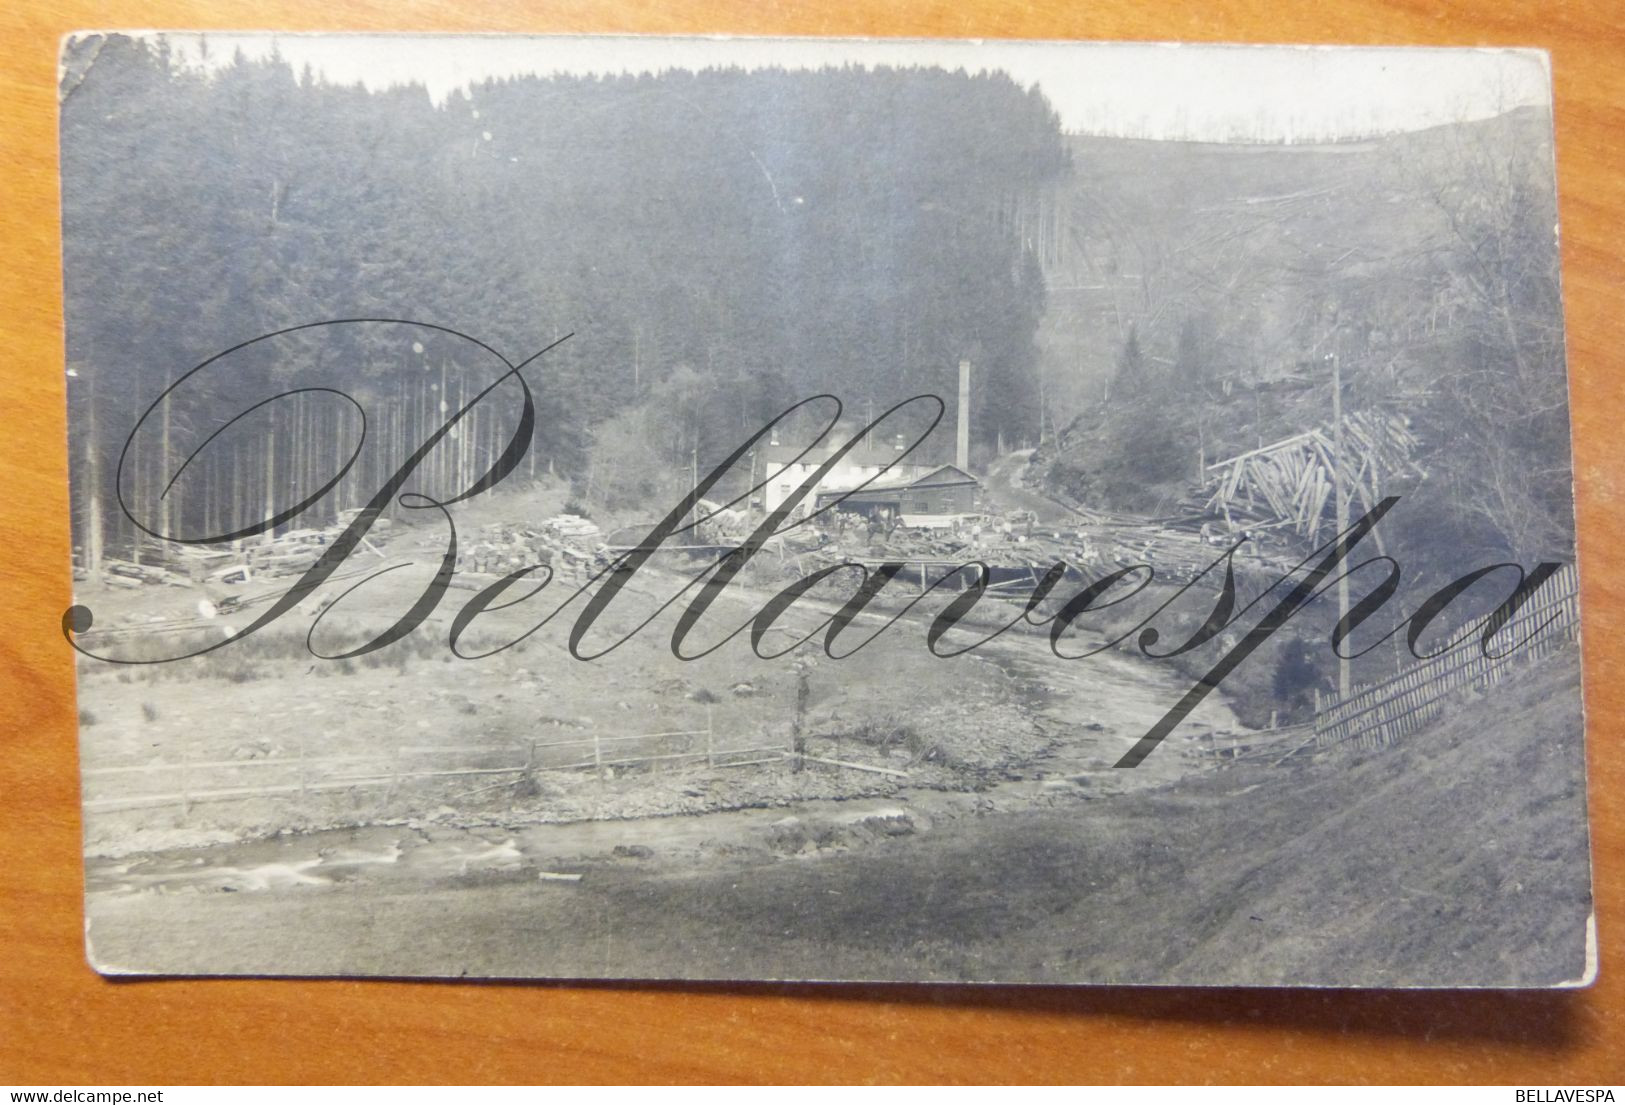 Unkown Photo Foto -real Picture Post Card-RPPC-Lumberlogging Houtzagerij. Verzonden Sended 1926 -Ardennes? Wallonie ?Be? - Professions